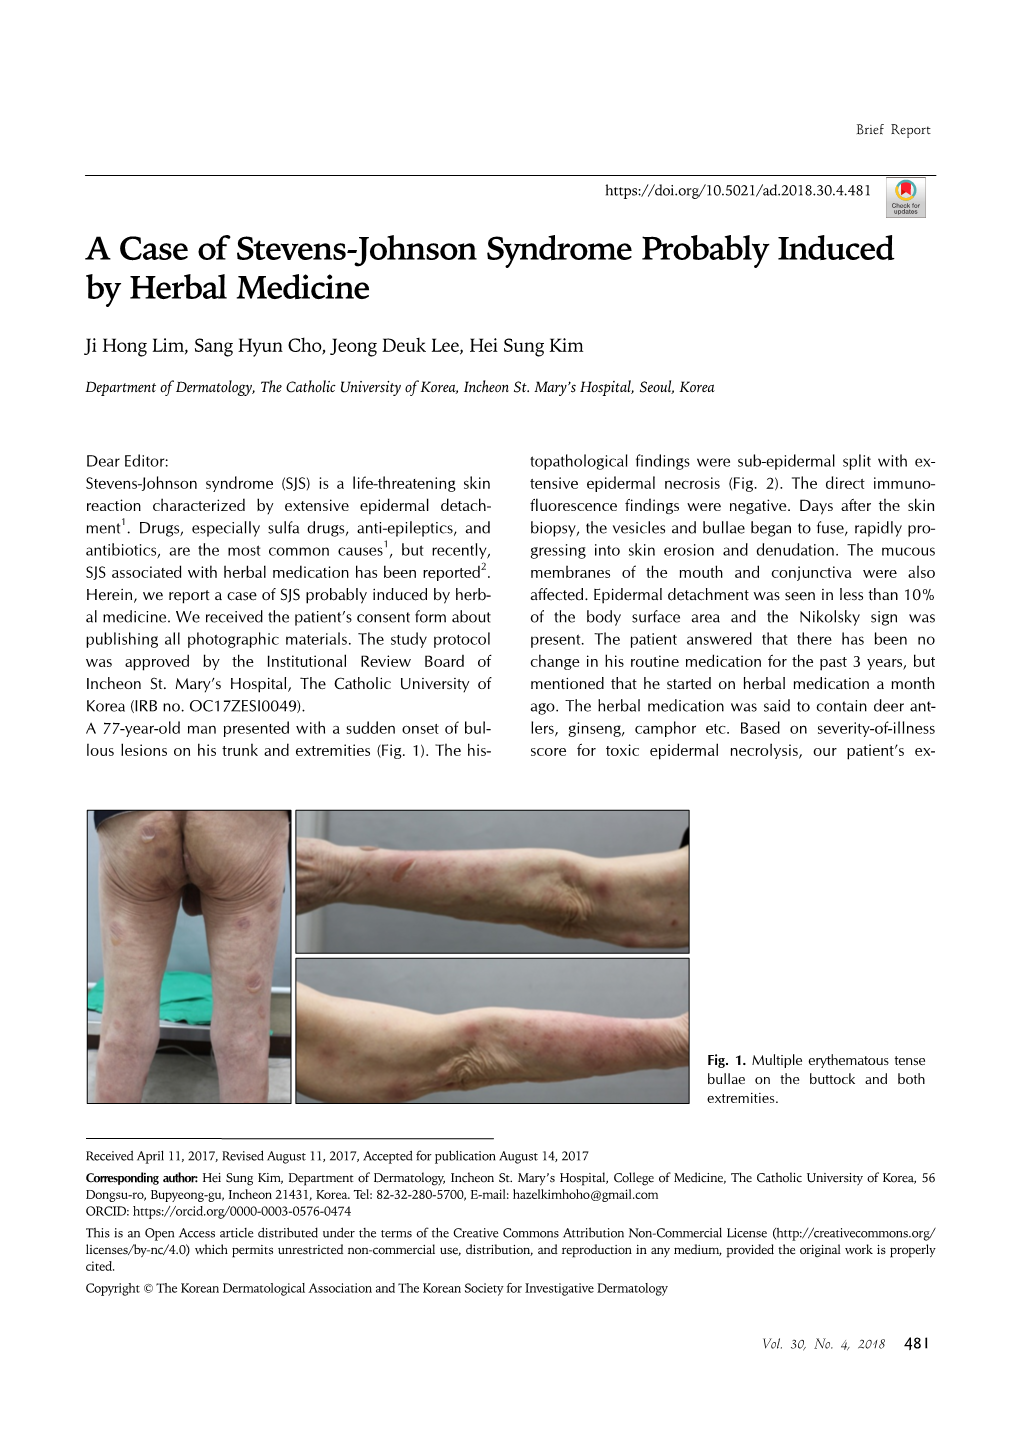 A Case of Stevens-Johnson Syndrome Probably Induced by Herbal Medicine